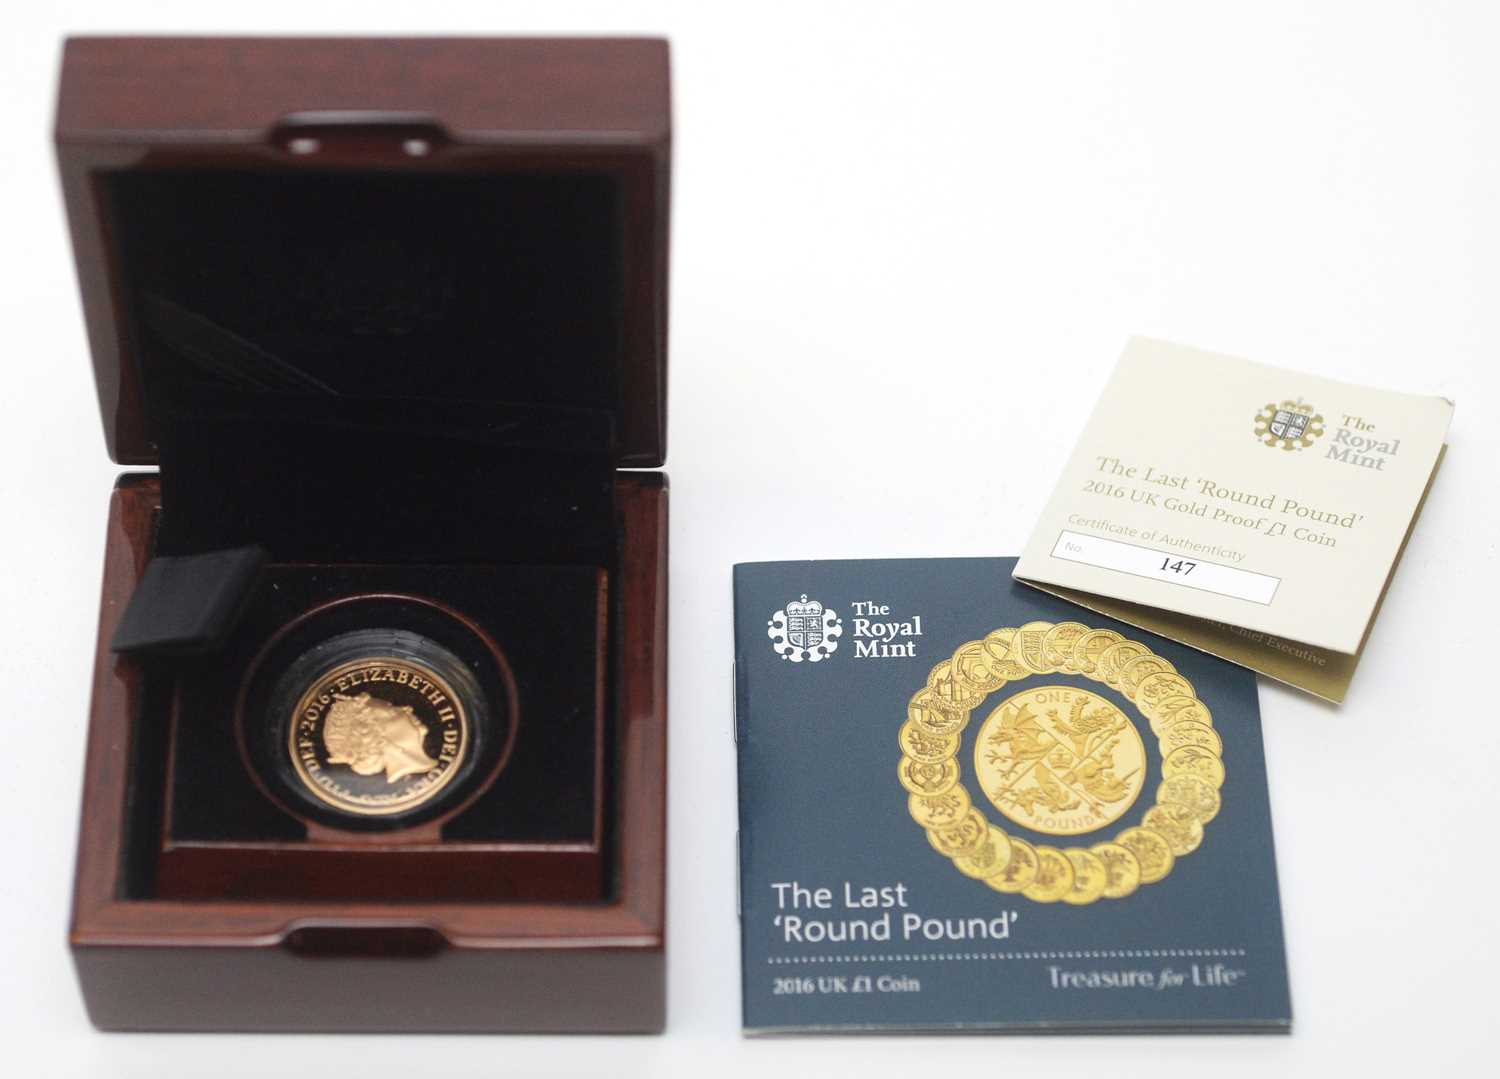 Lot 20 - The Last 'Round Pound', issued by The Royal Mint in 2016 as a £1 22ct gold proof coin